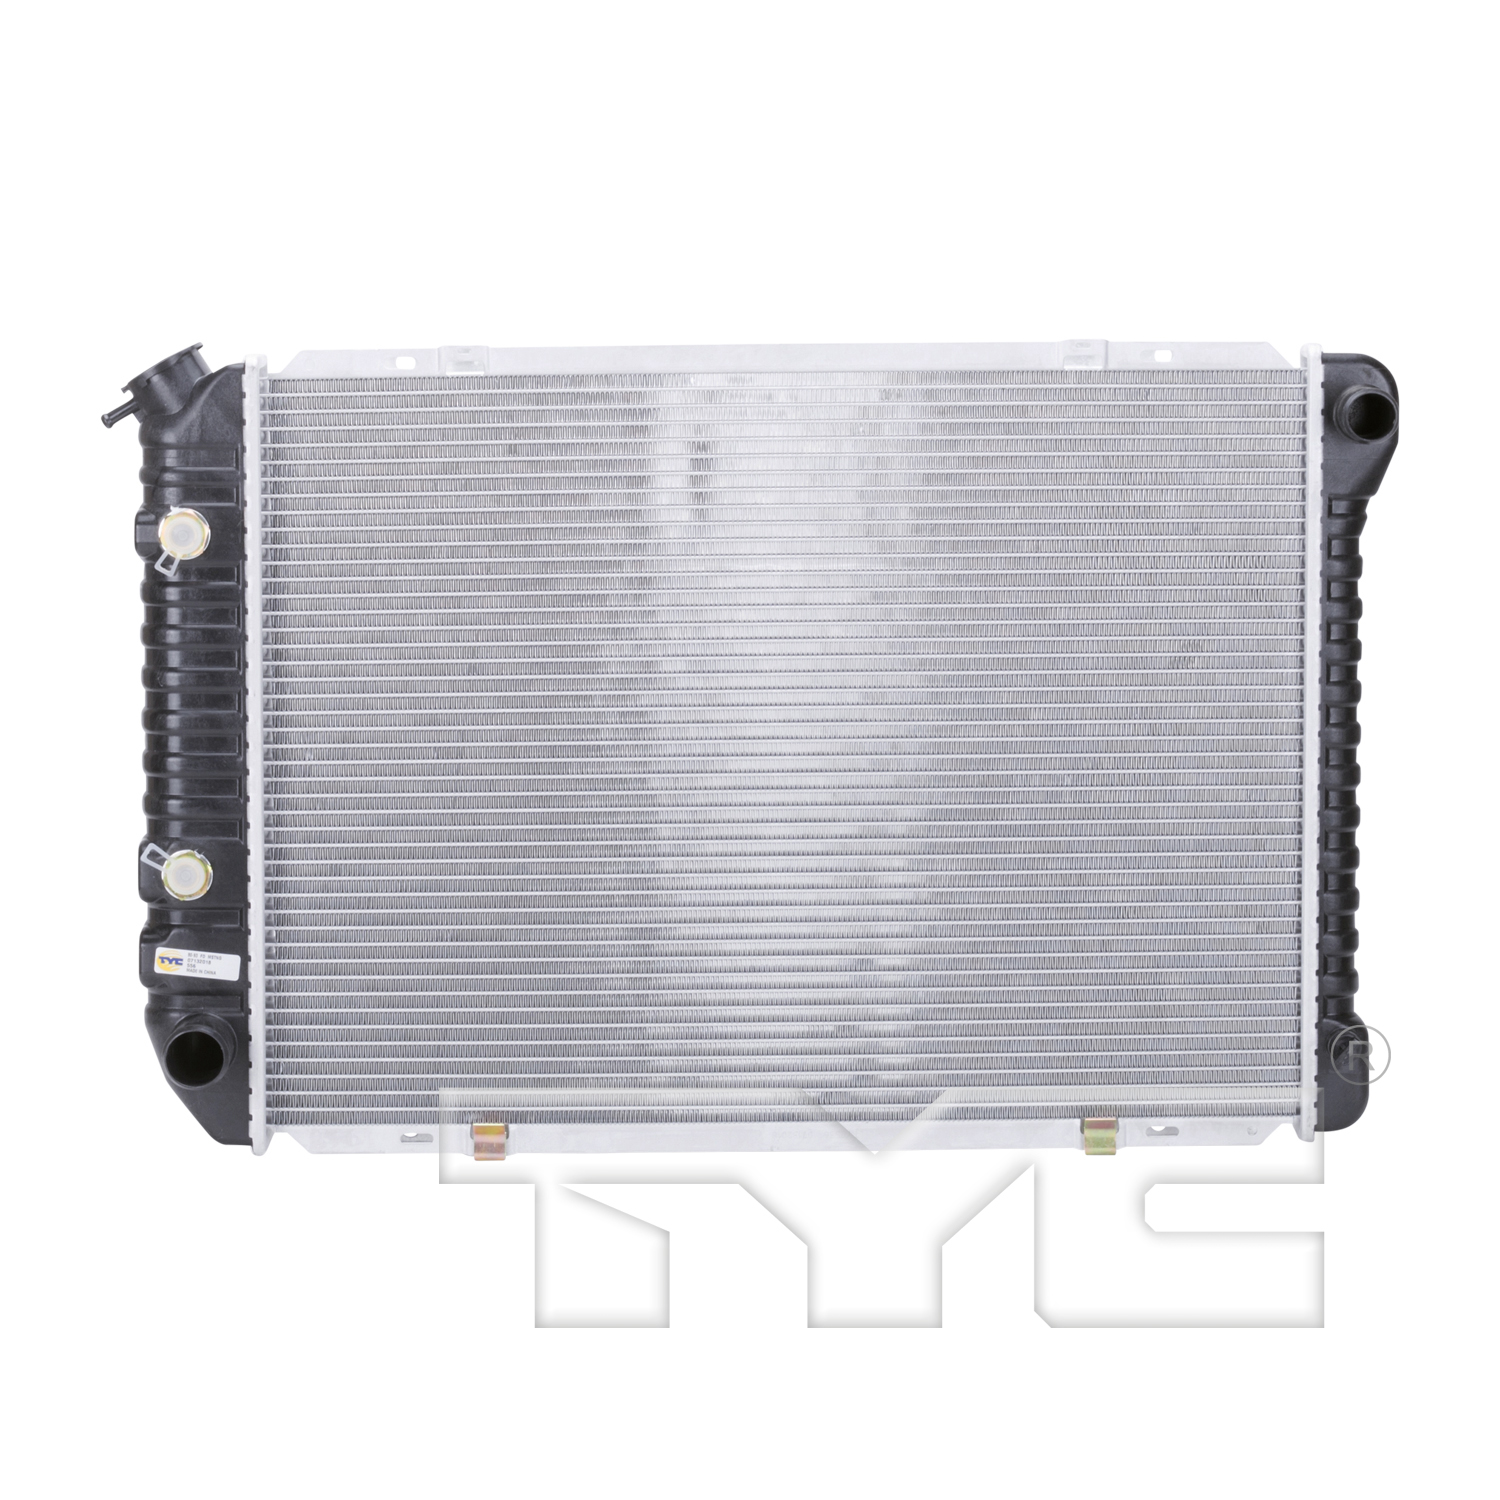 Aftermarket RADIATORS for FORD - MUSTANG, MUSTANG,89-93,Radiator assembly